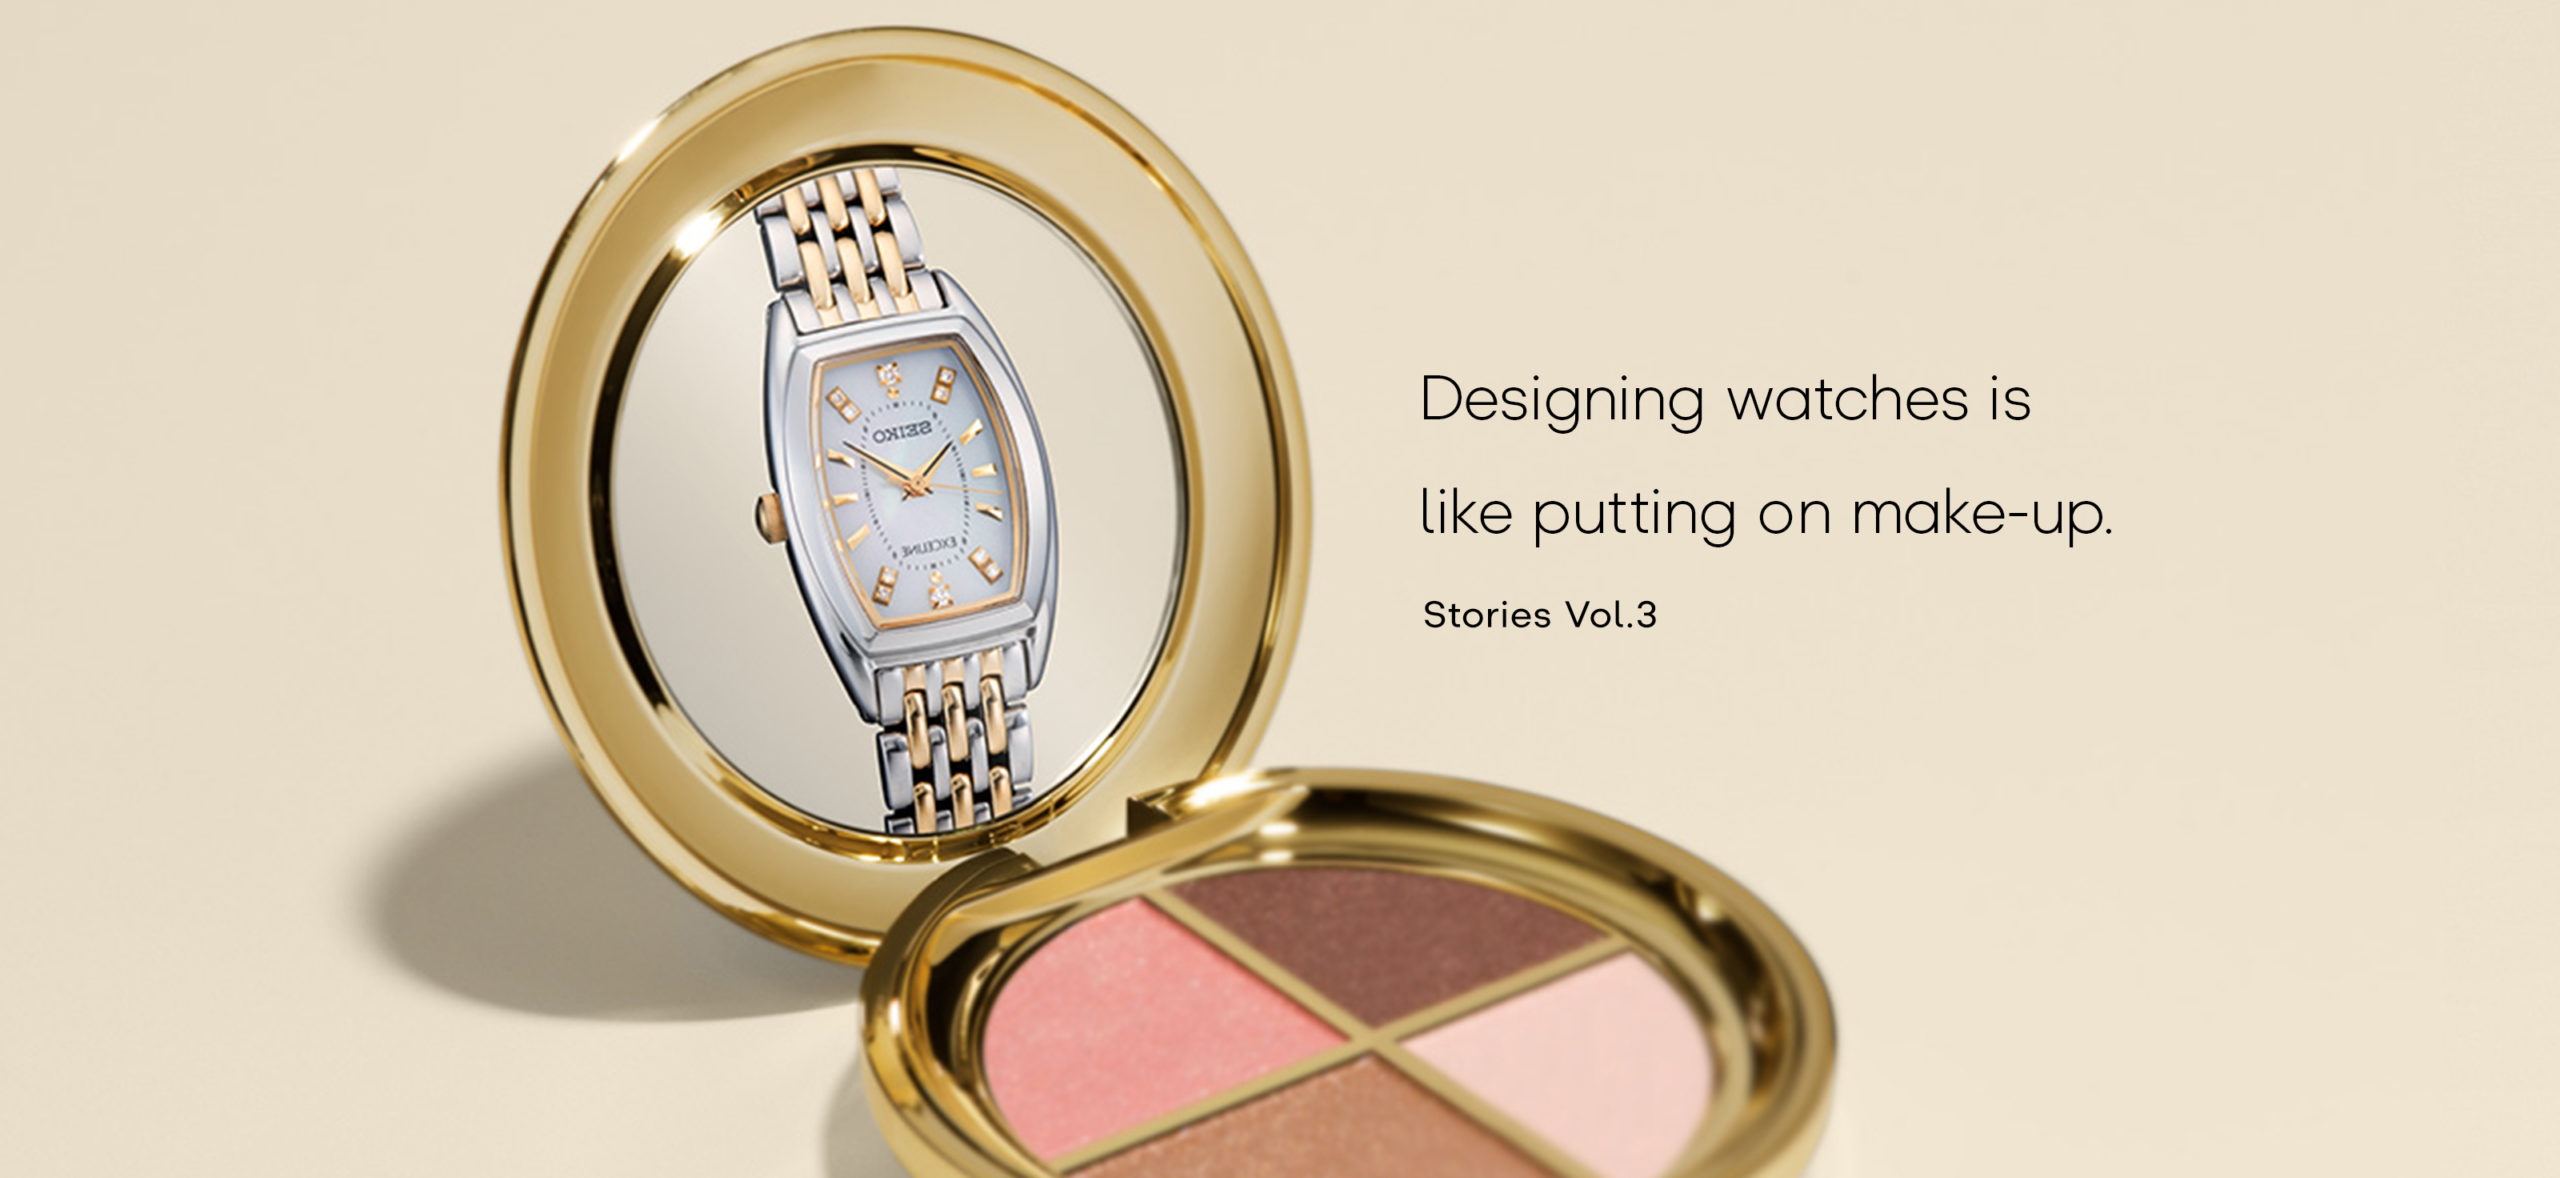 Vol.3 Designing watches is like putting on make-up.